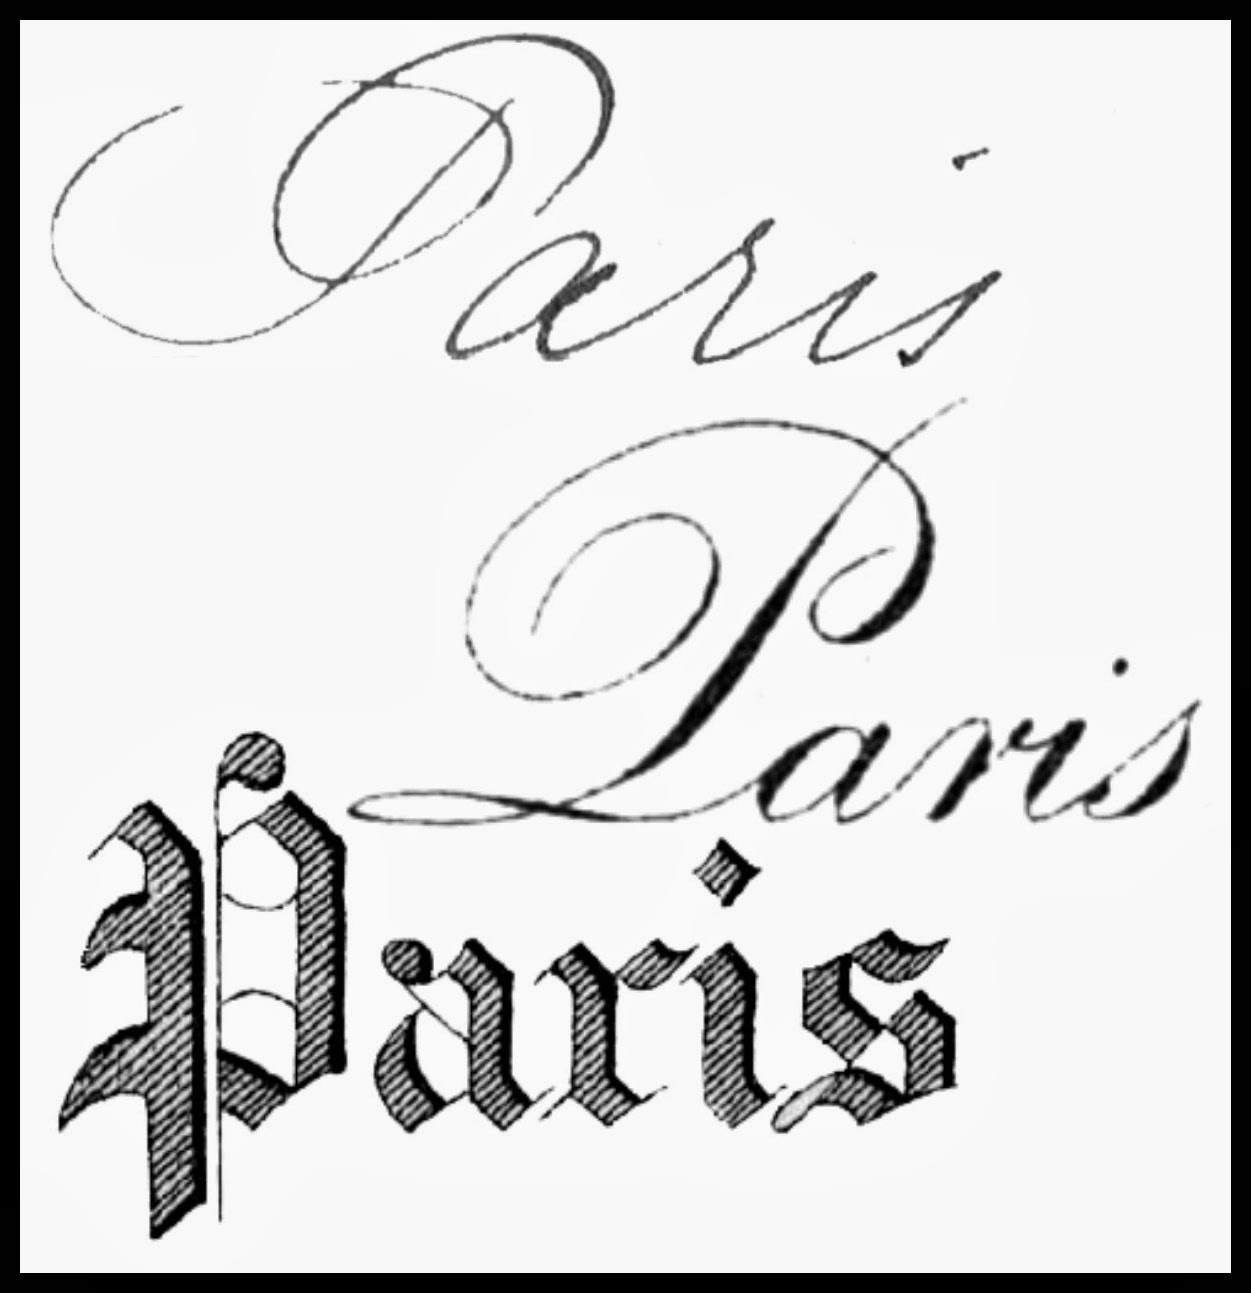 Paris-French-Typography-Antique-Graphics-Royalty-Free-Stock-Image